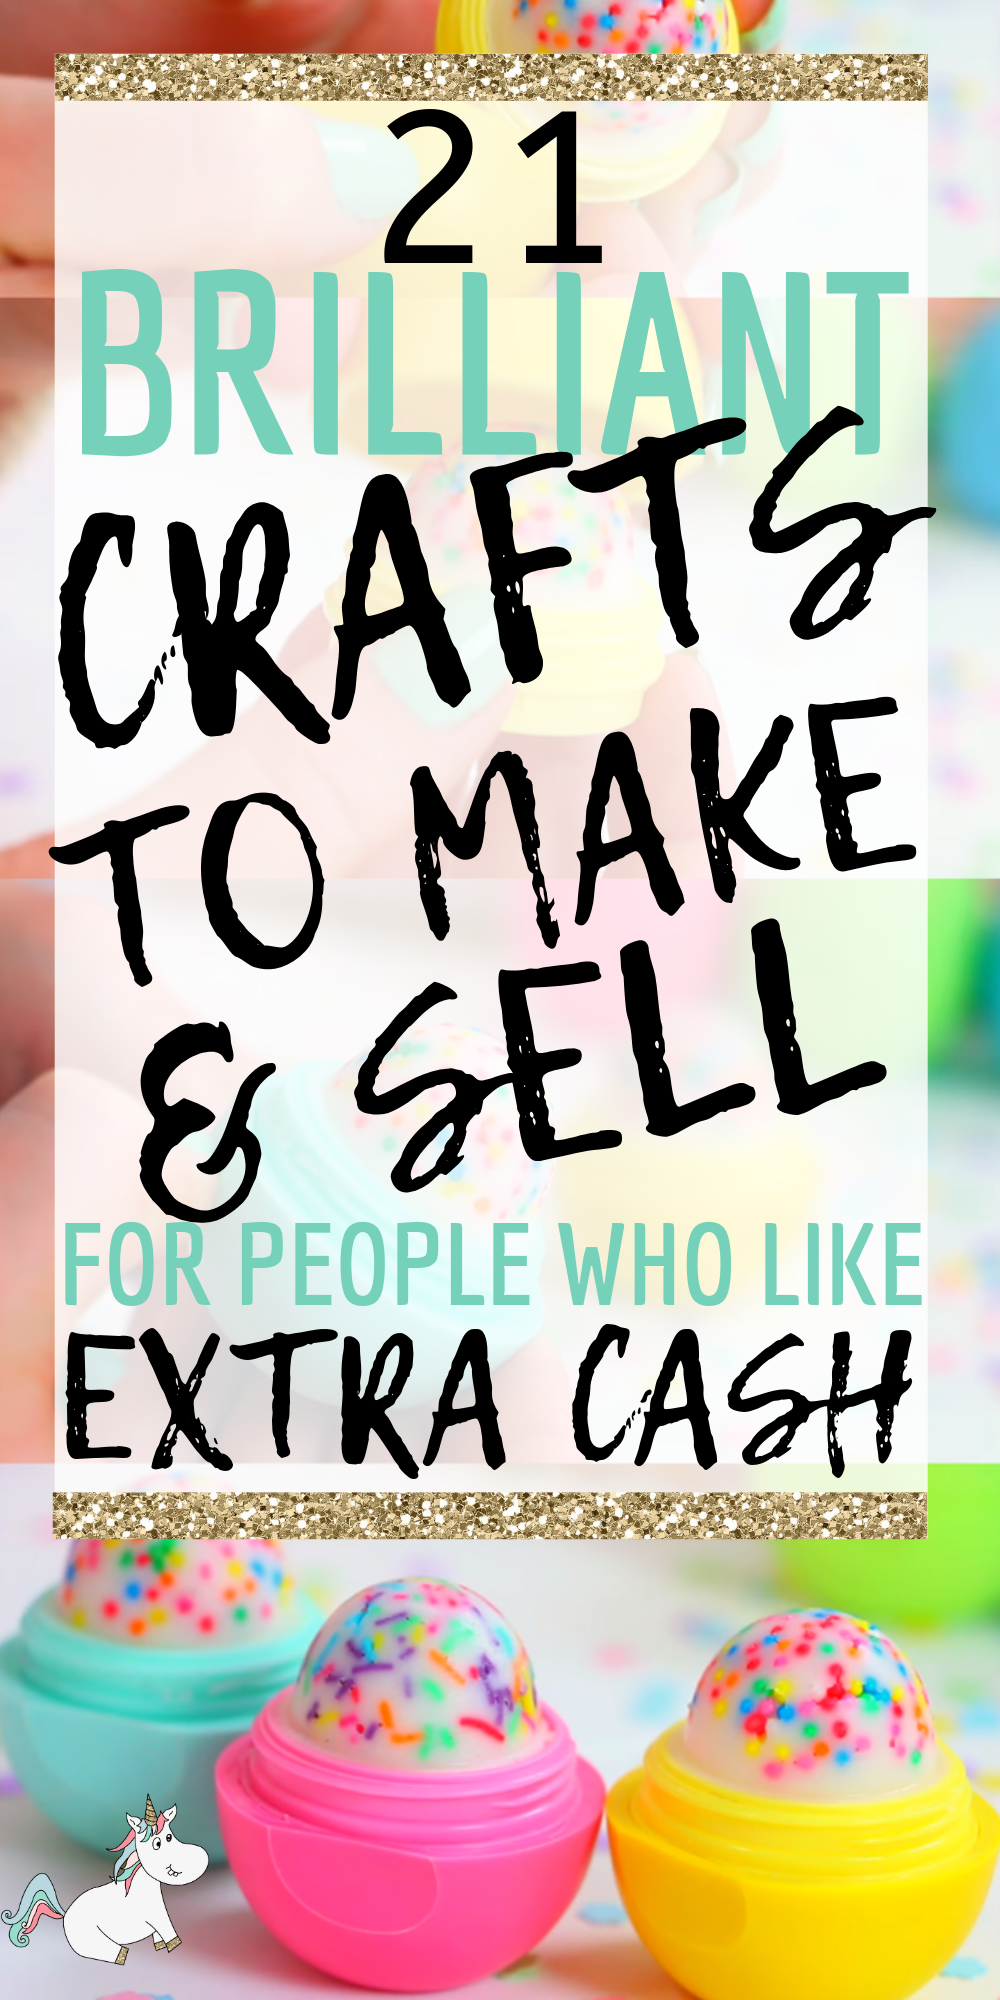 21 Brilliant Crafts To Make And Sell For Extra Cash In 2019 -   18 creative homemade crafts
 ideas